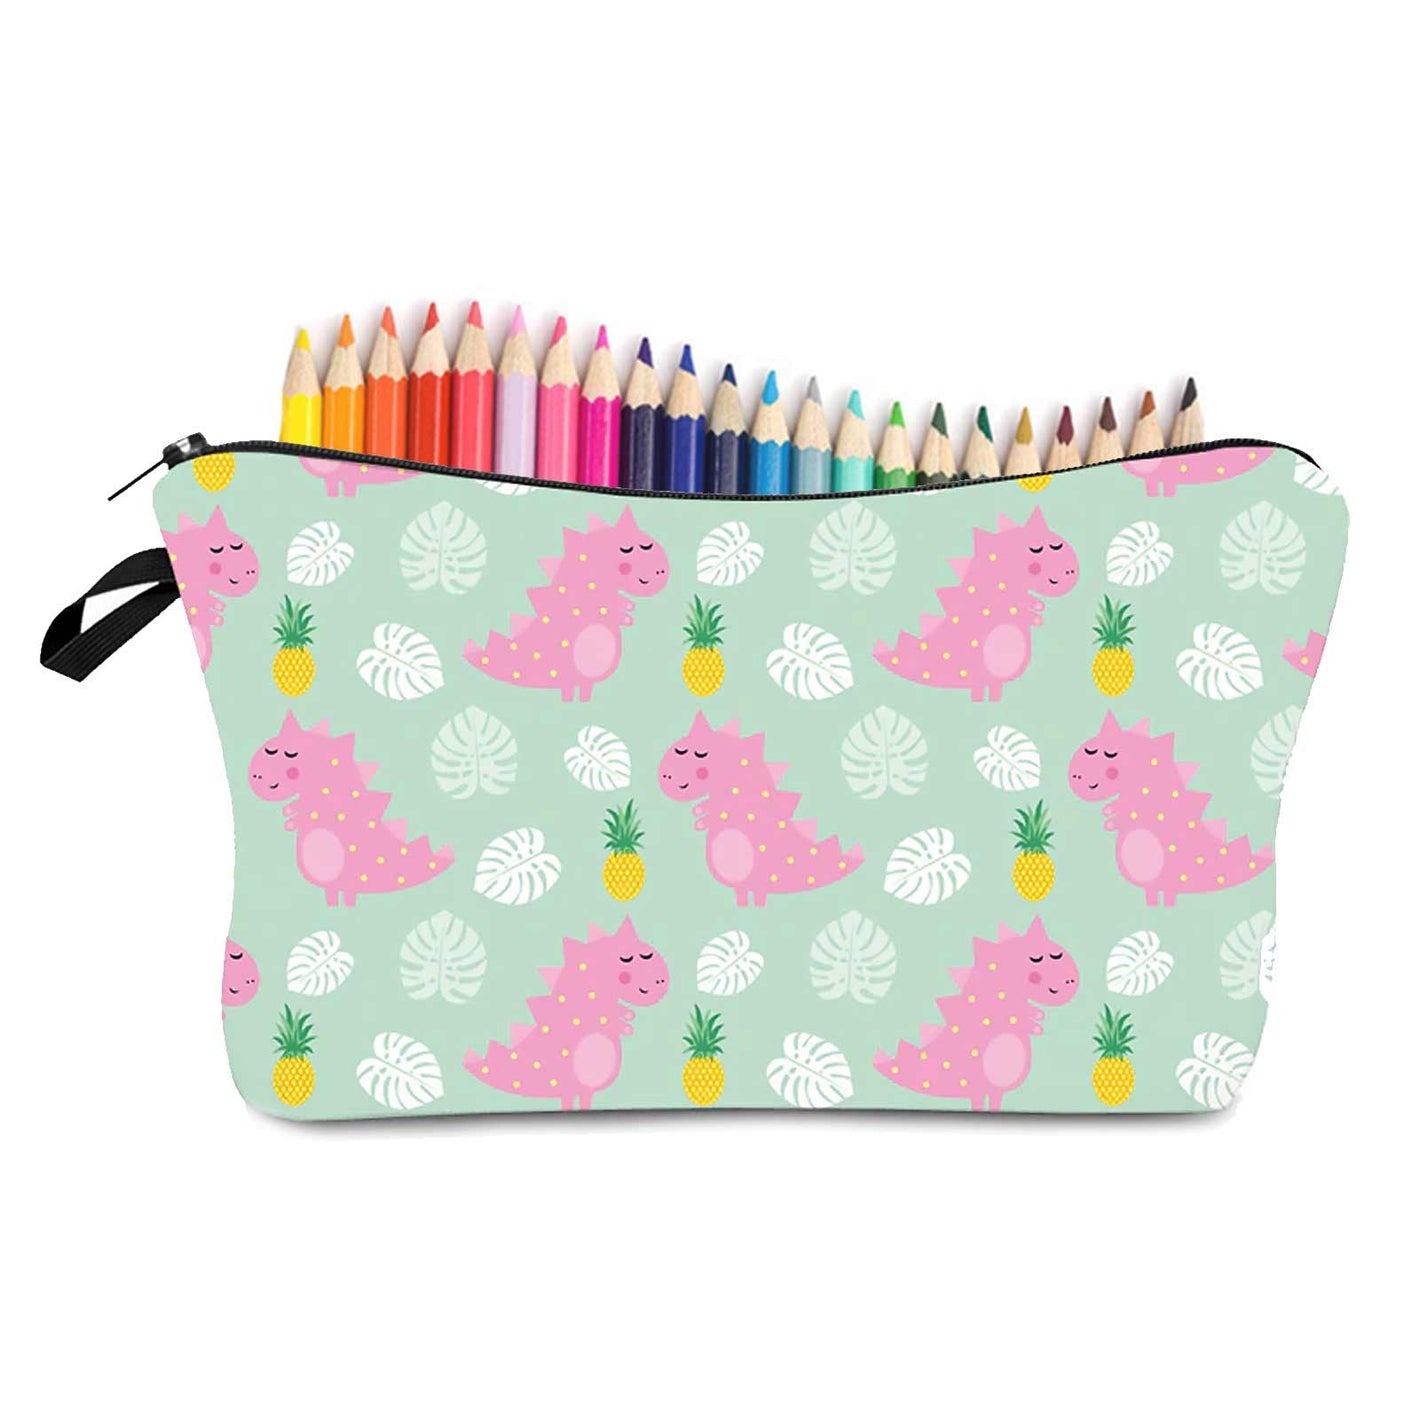 Cute Pink Dinosaurs Pineapple Pencil Cases Brush Holder Bag - Cosmetic Bags by Fashion Accessories